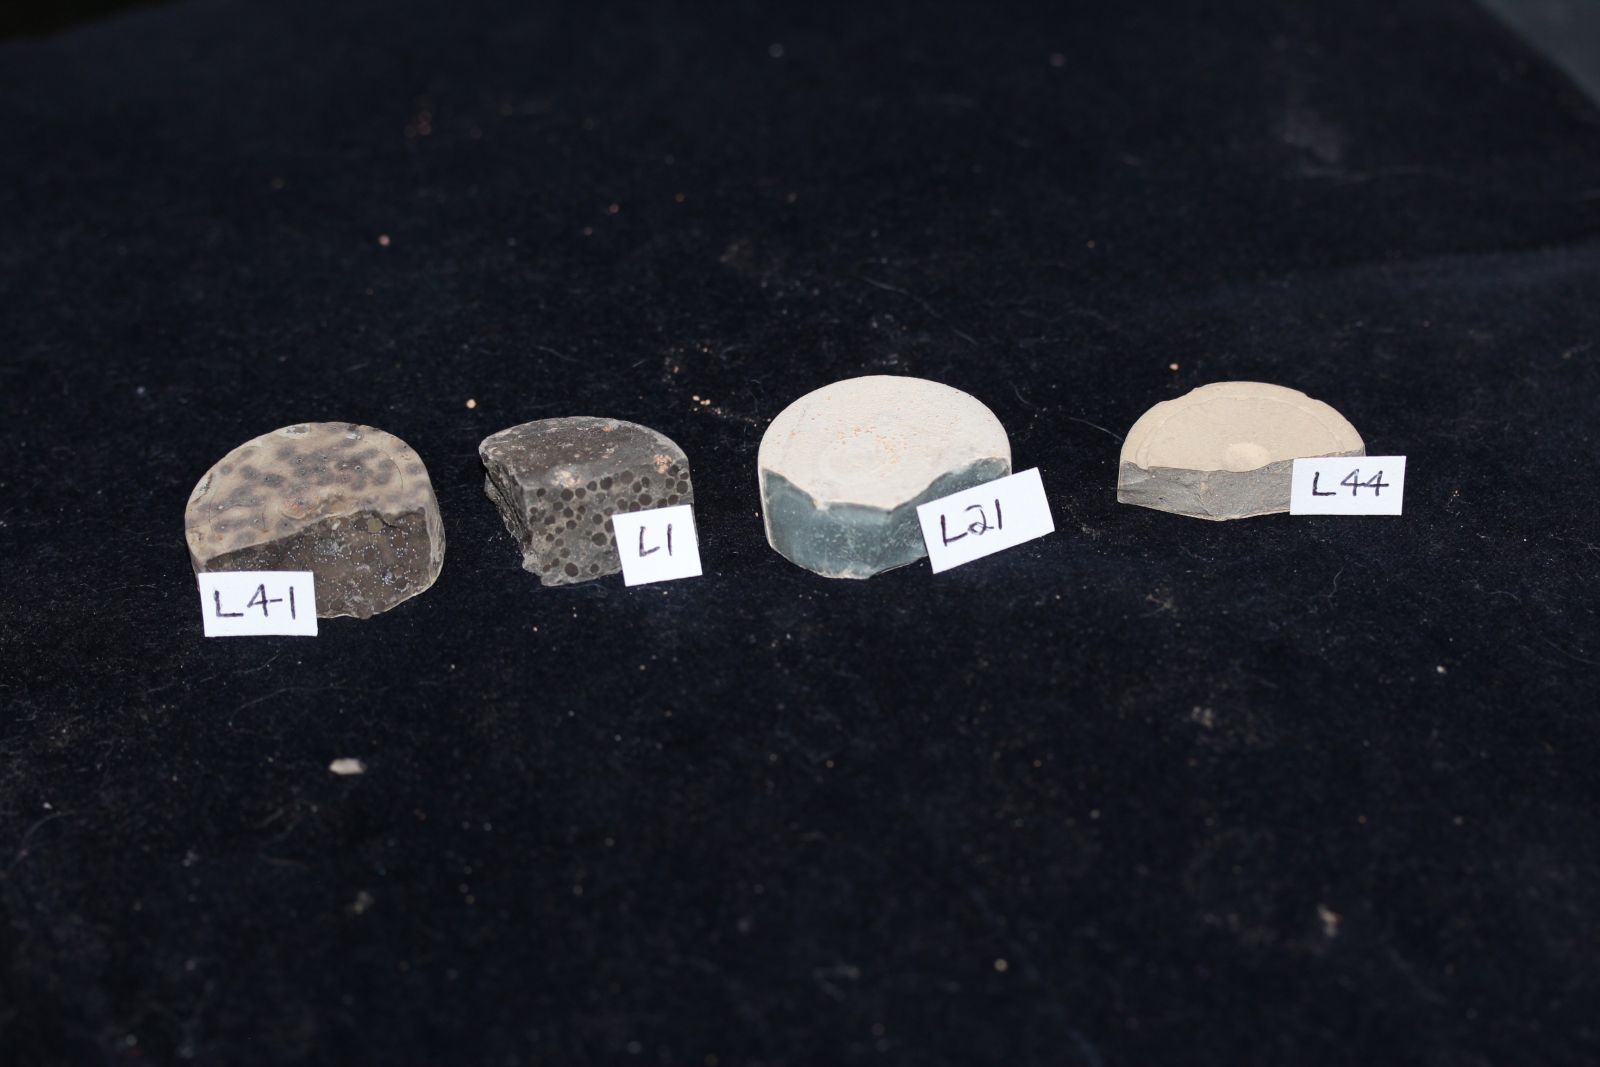 Four samples of different formulations of cement that were tested for their ability to immobilize radioiodine.